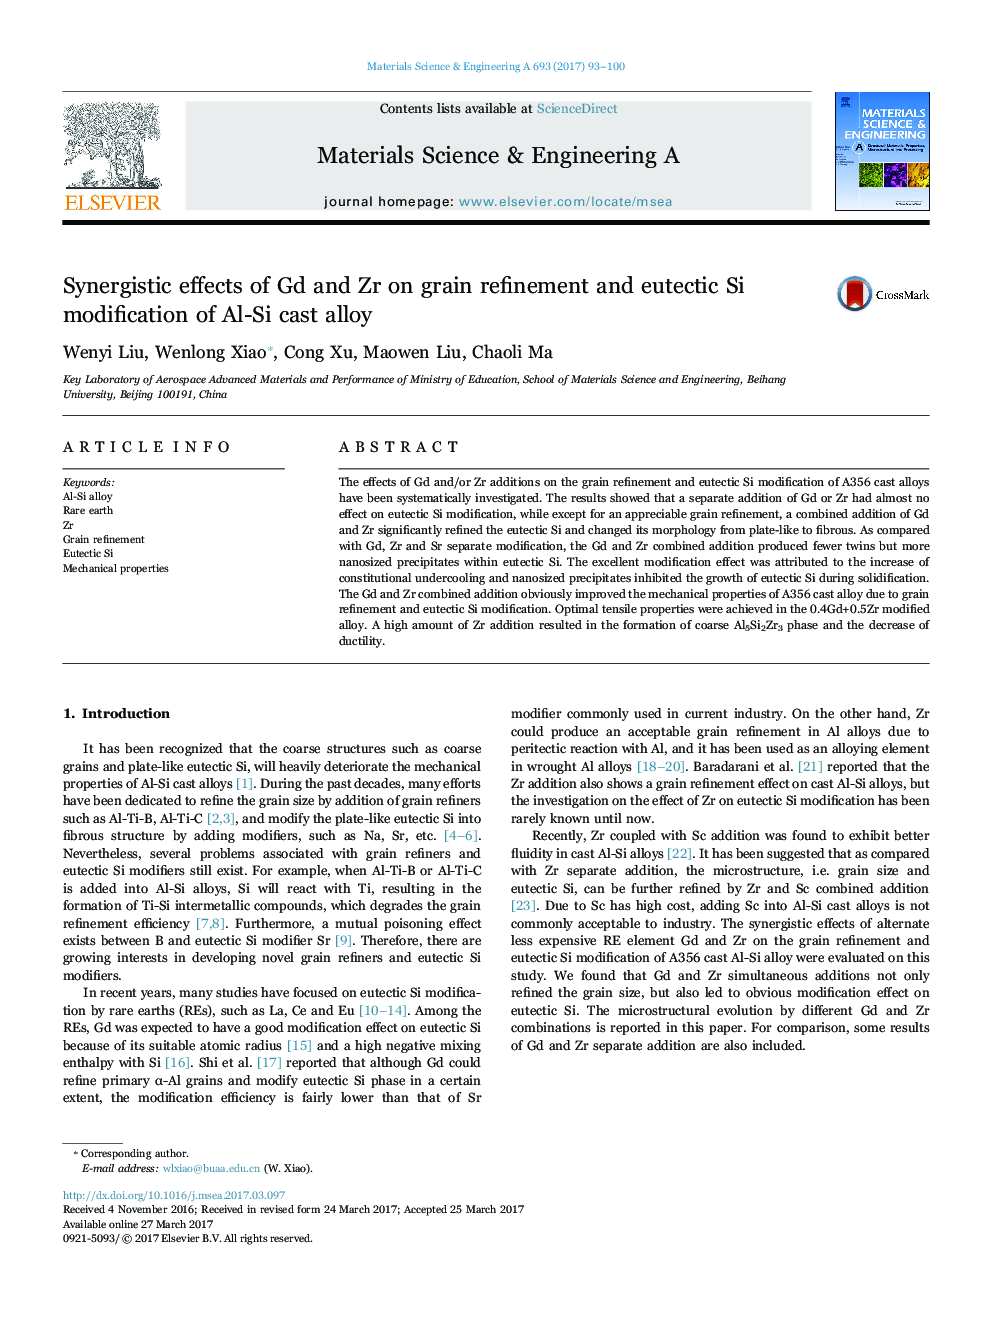 Synergistic effects of Gd and Zr on grain refinement and eutectic Si modification of Al-Si cast alloy